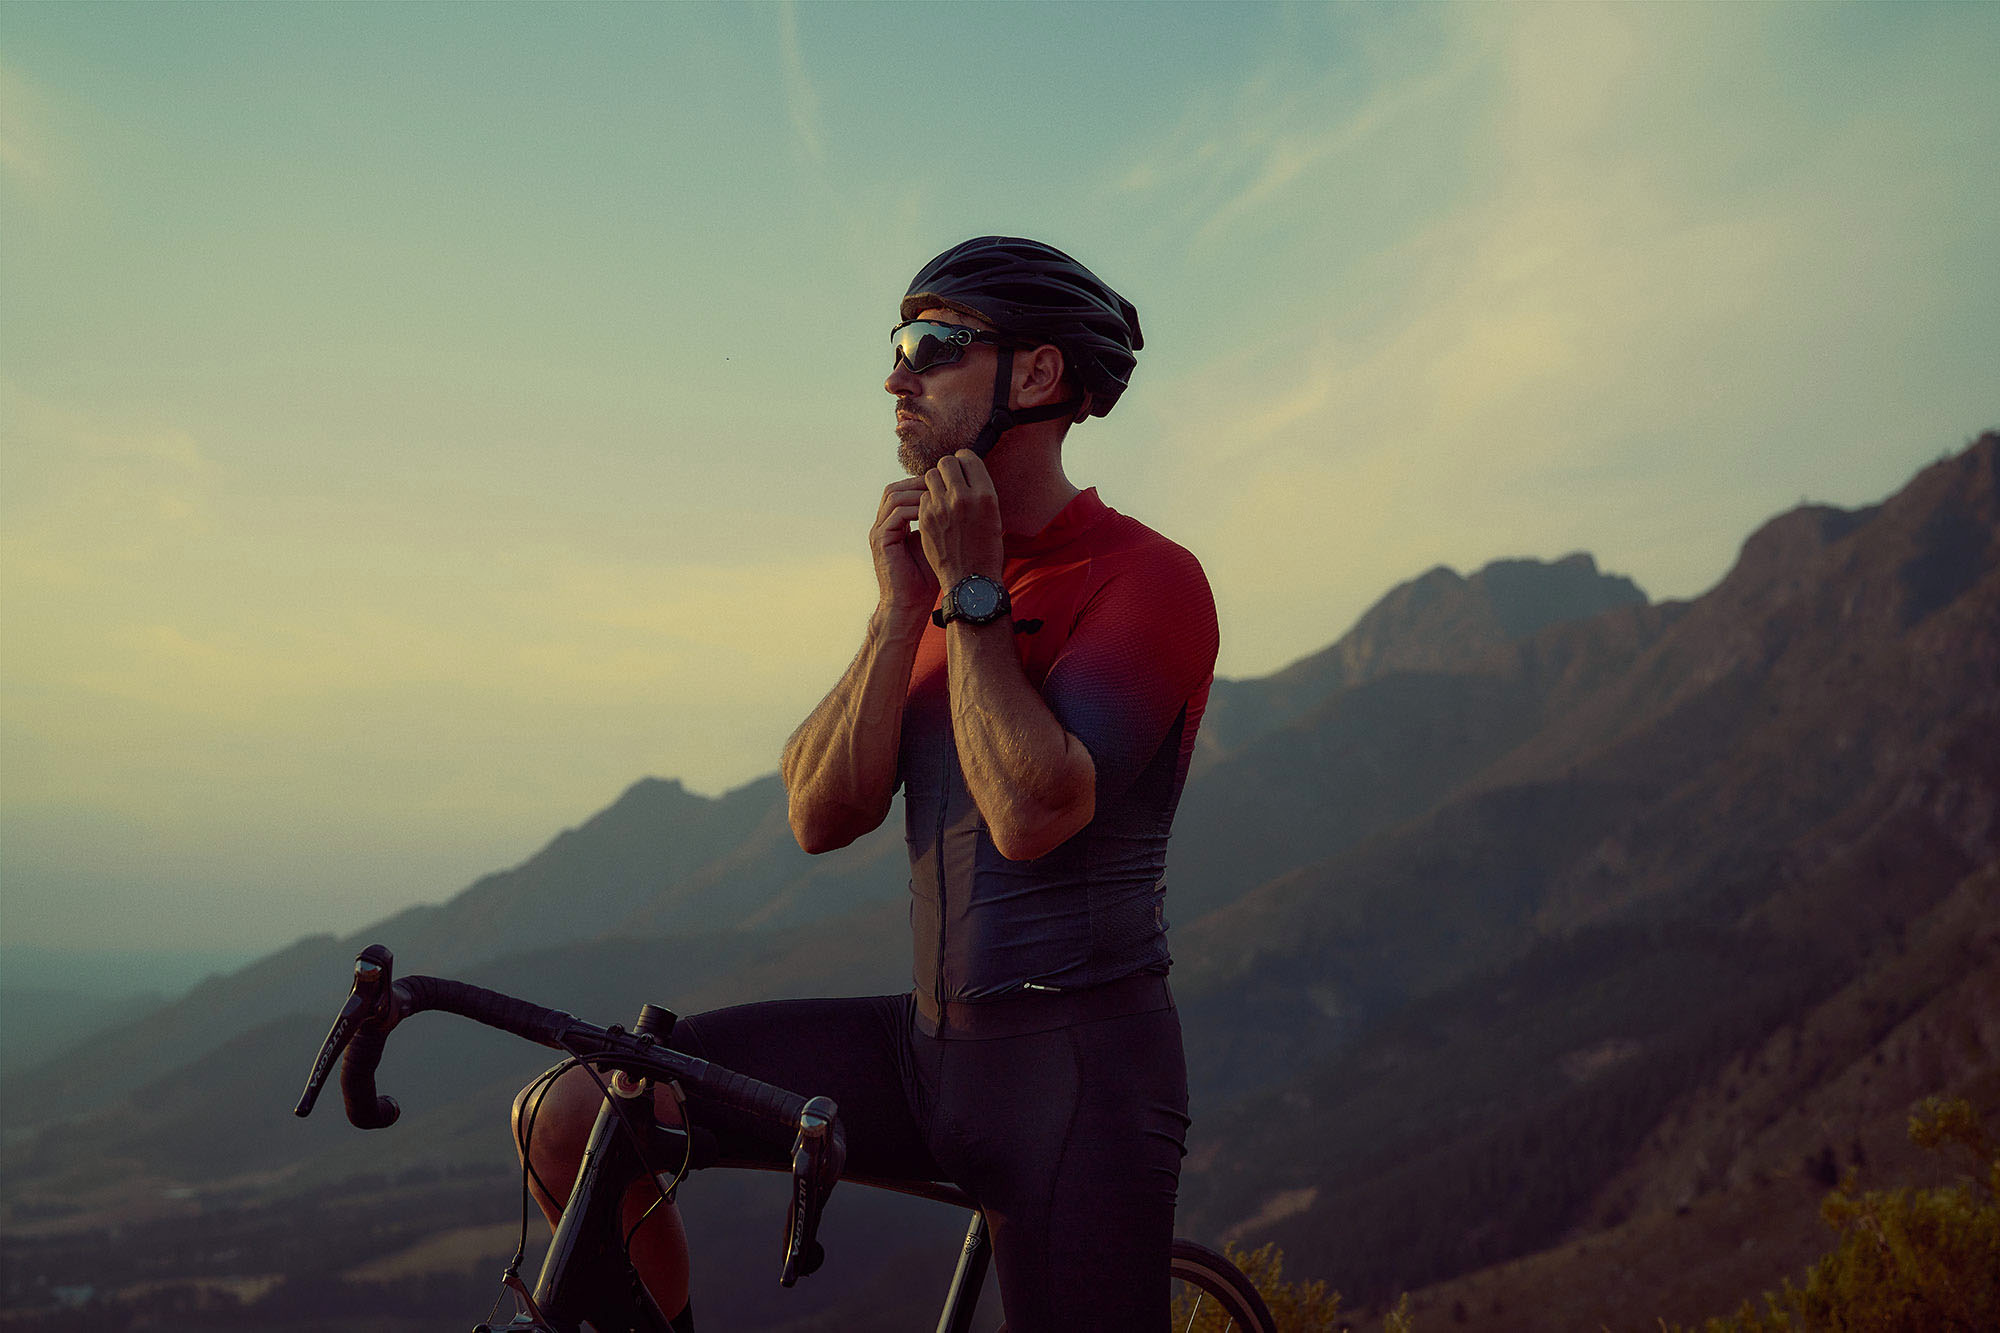 photograph carefully emphasises the exquisite details and craftsmanship of the Tissot T-Touch Connect watch. Lifestyle product photography highlights the synergy between the cyclist and the mountain range.